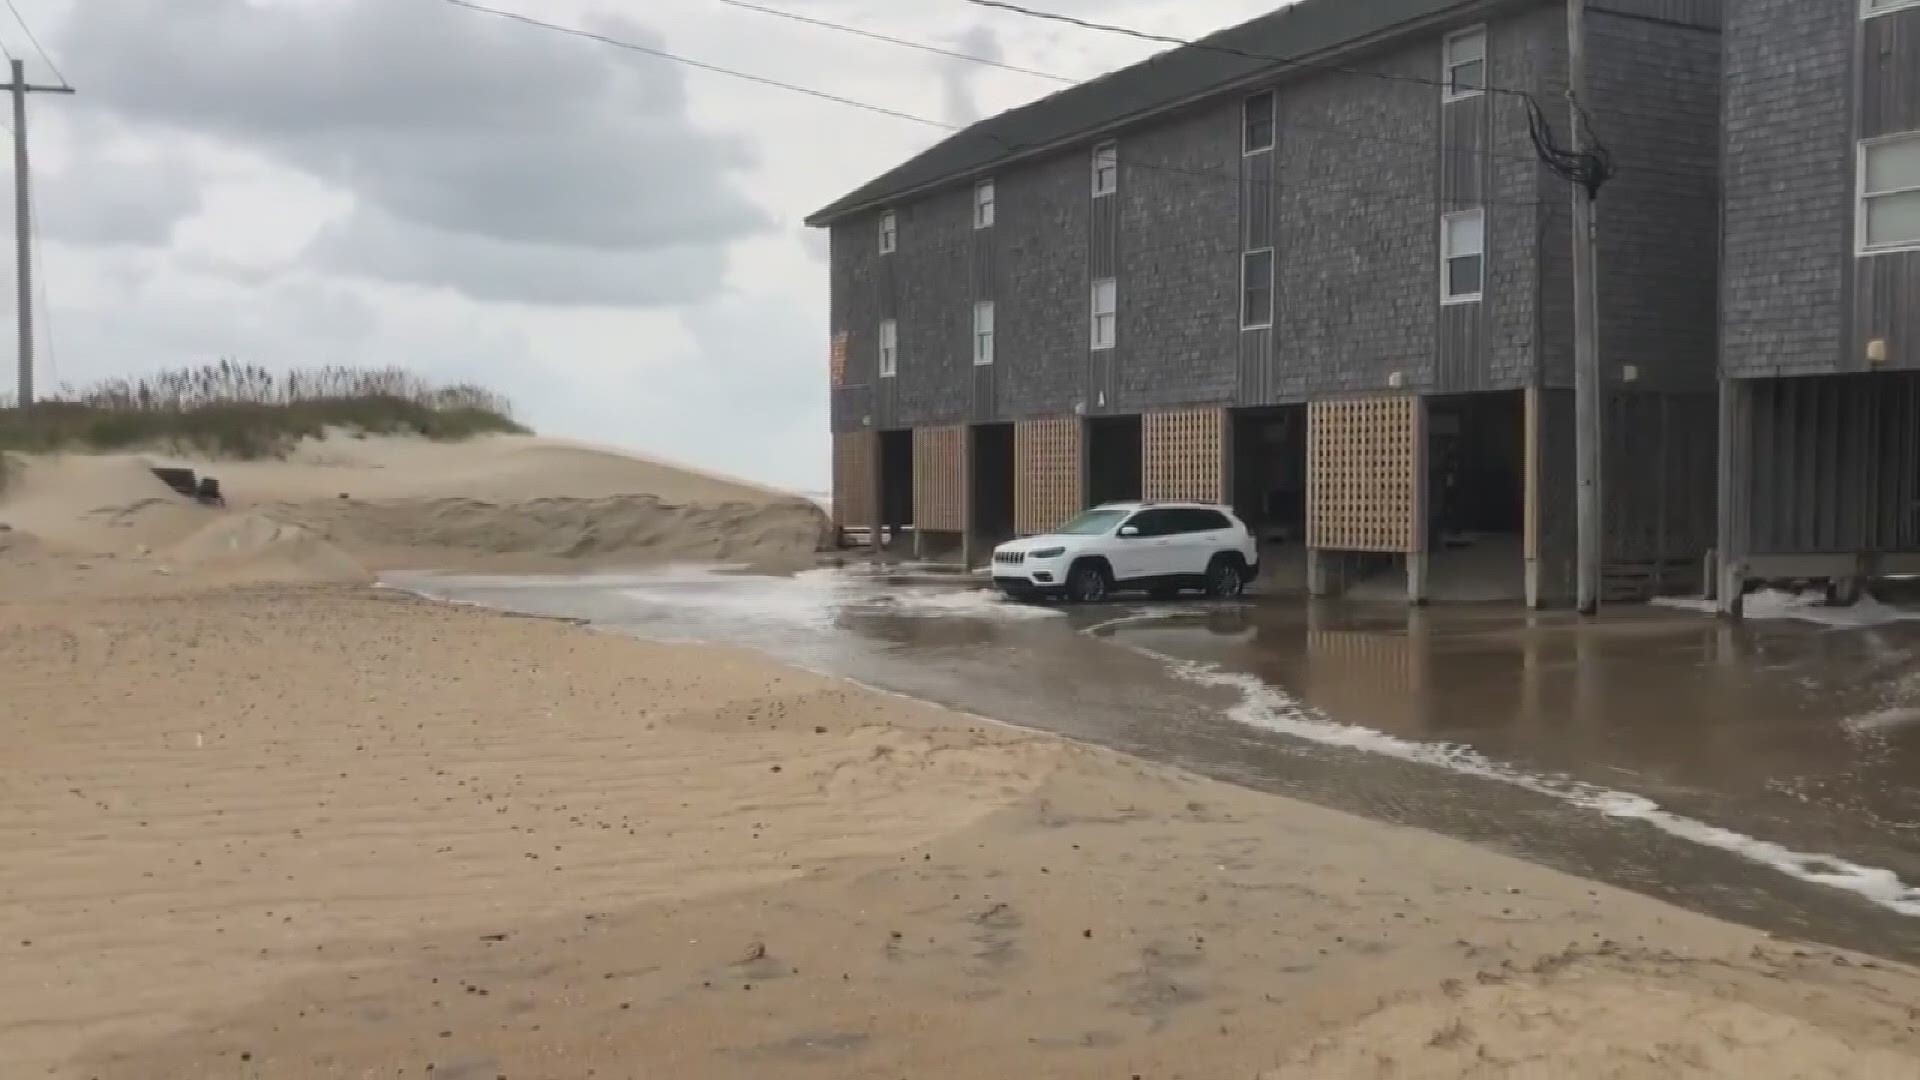 Areas in Buxton, NC saw overwash on roads as high winds brought high tides. (Credit: Janet Morrow Dawson / Cape Hatteras Motel)